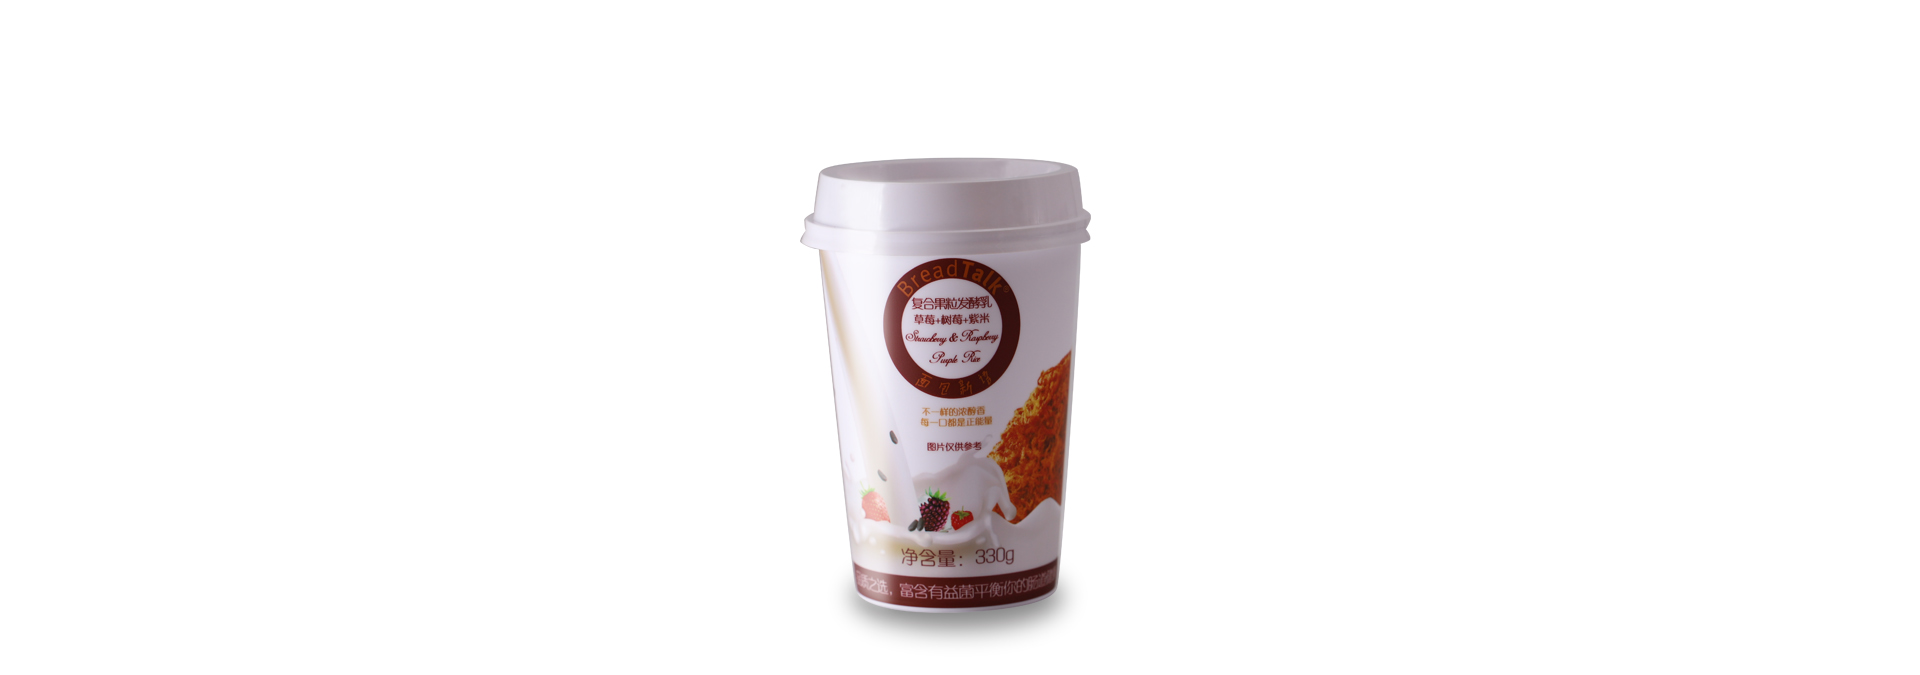 200ml (80g) Cup